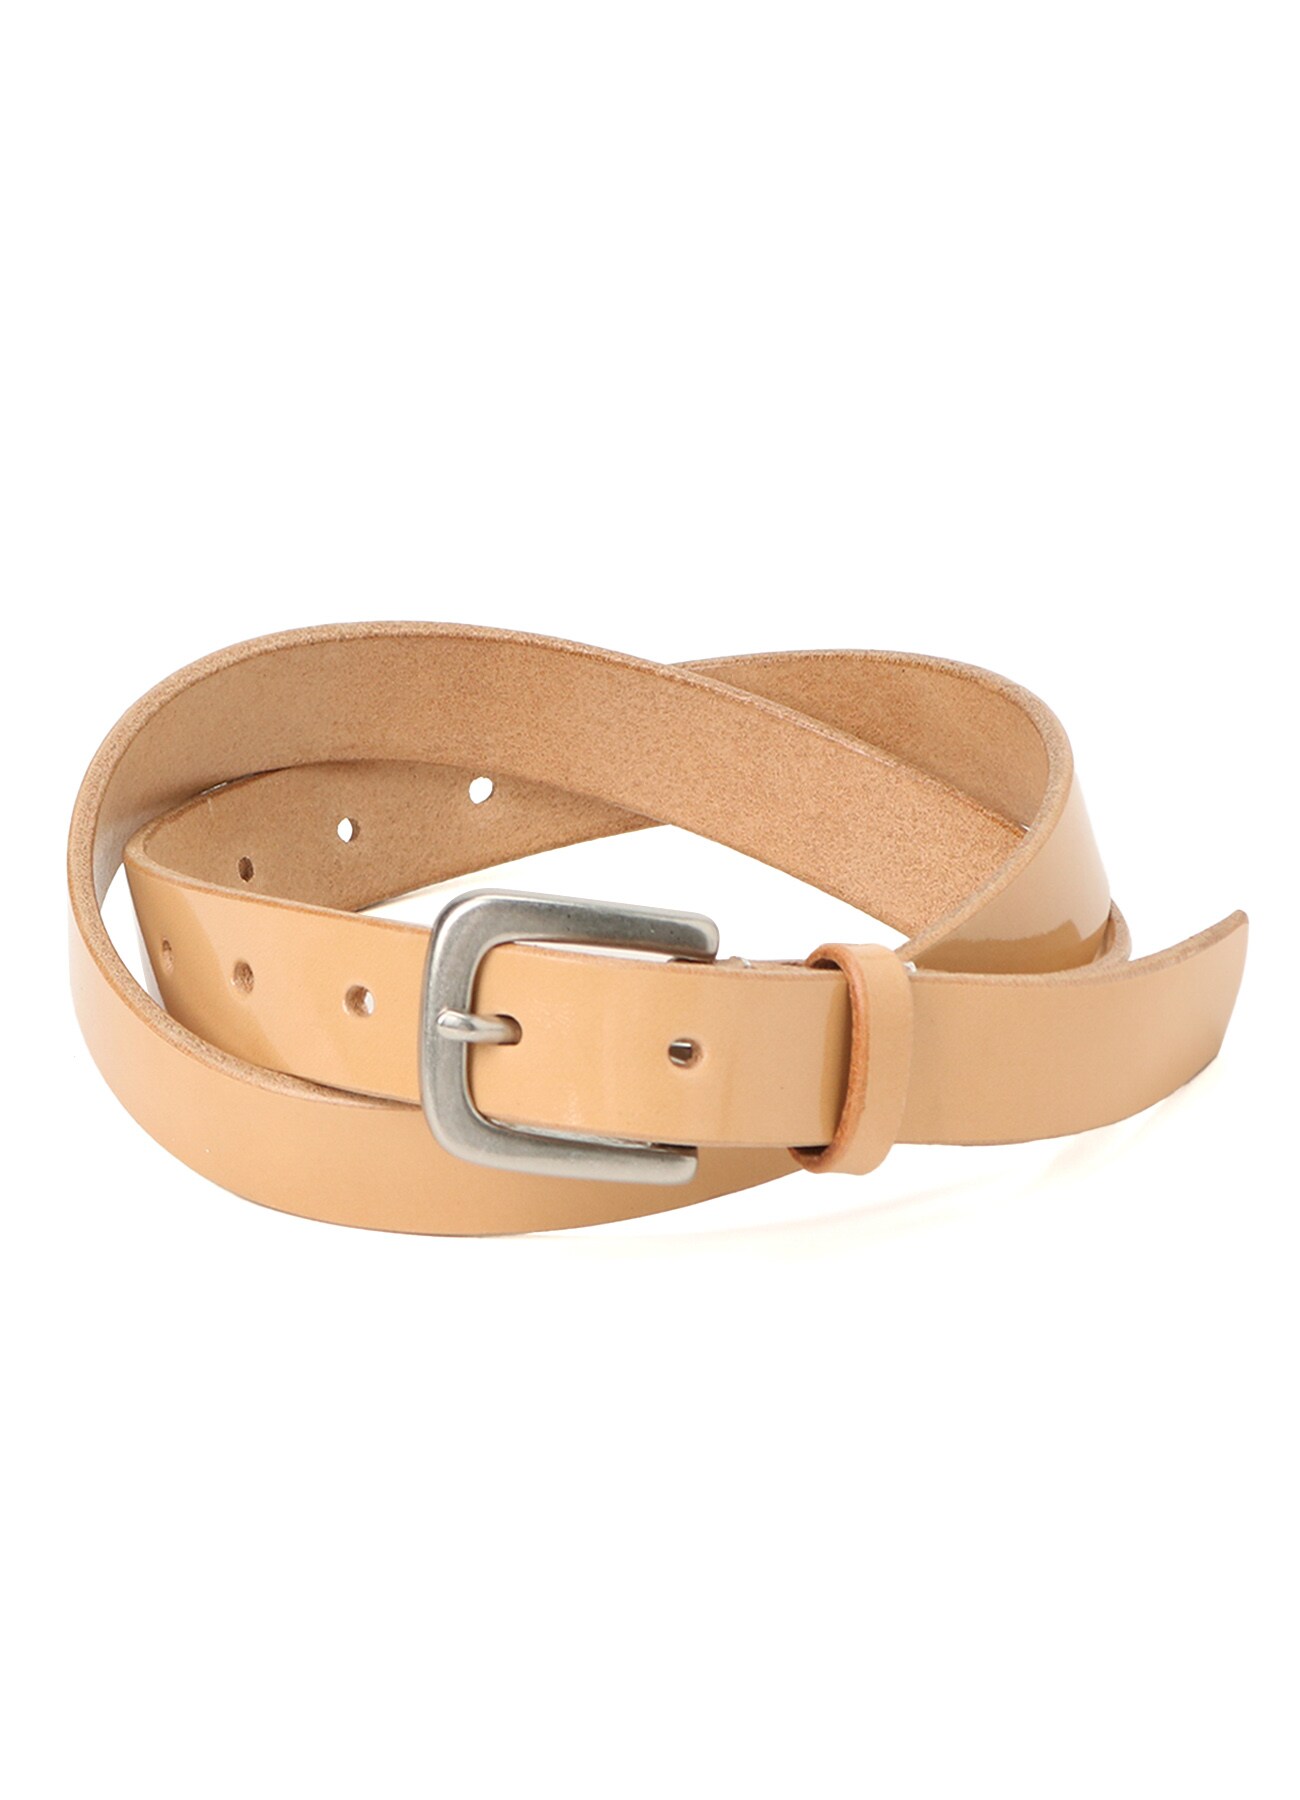 TANNED ENAMEL-COATED LEATHER 25MM BELT(S Beige): Y's｜THE SHOP